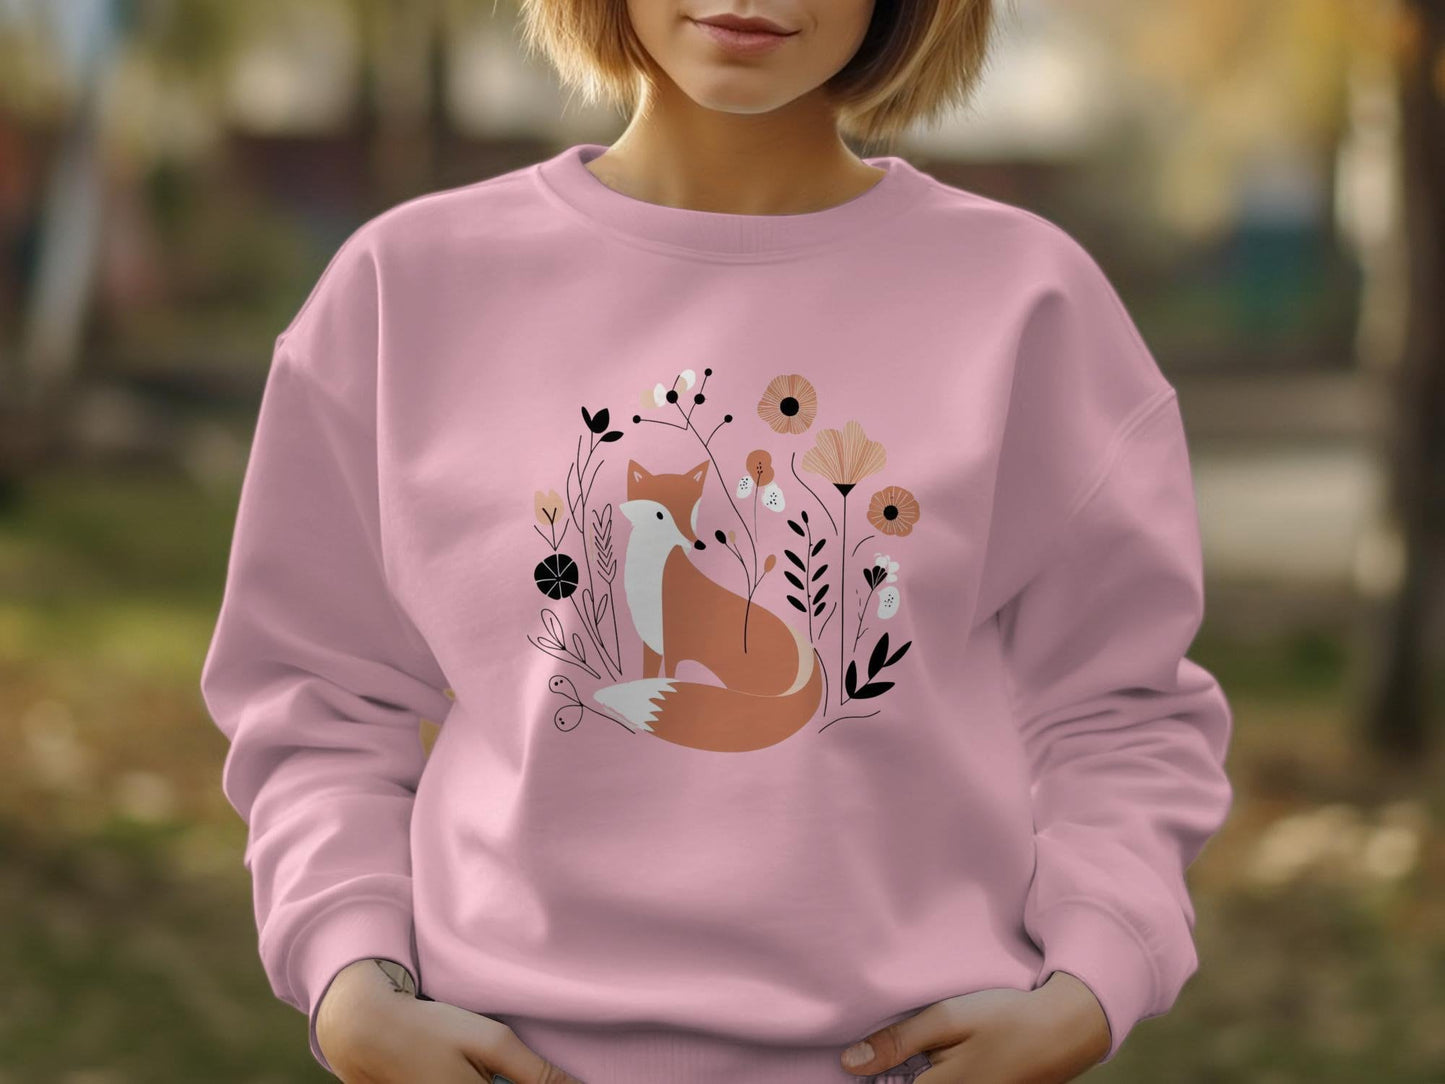 Chic Cottagecore Fox Sweatshirt - Floral Animal Lover Gift with Abstract Graphic Design